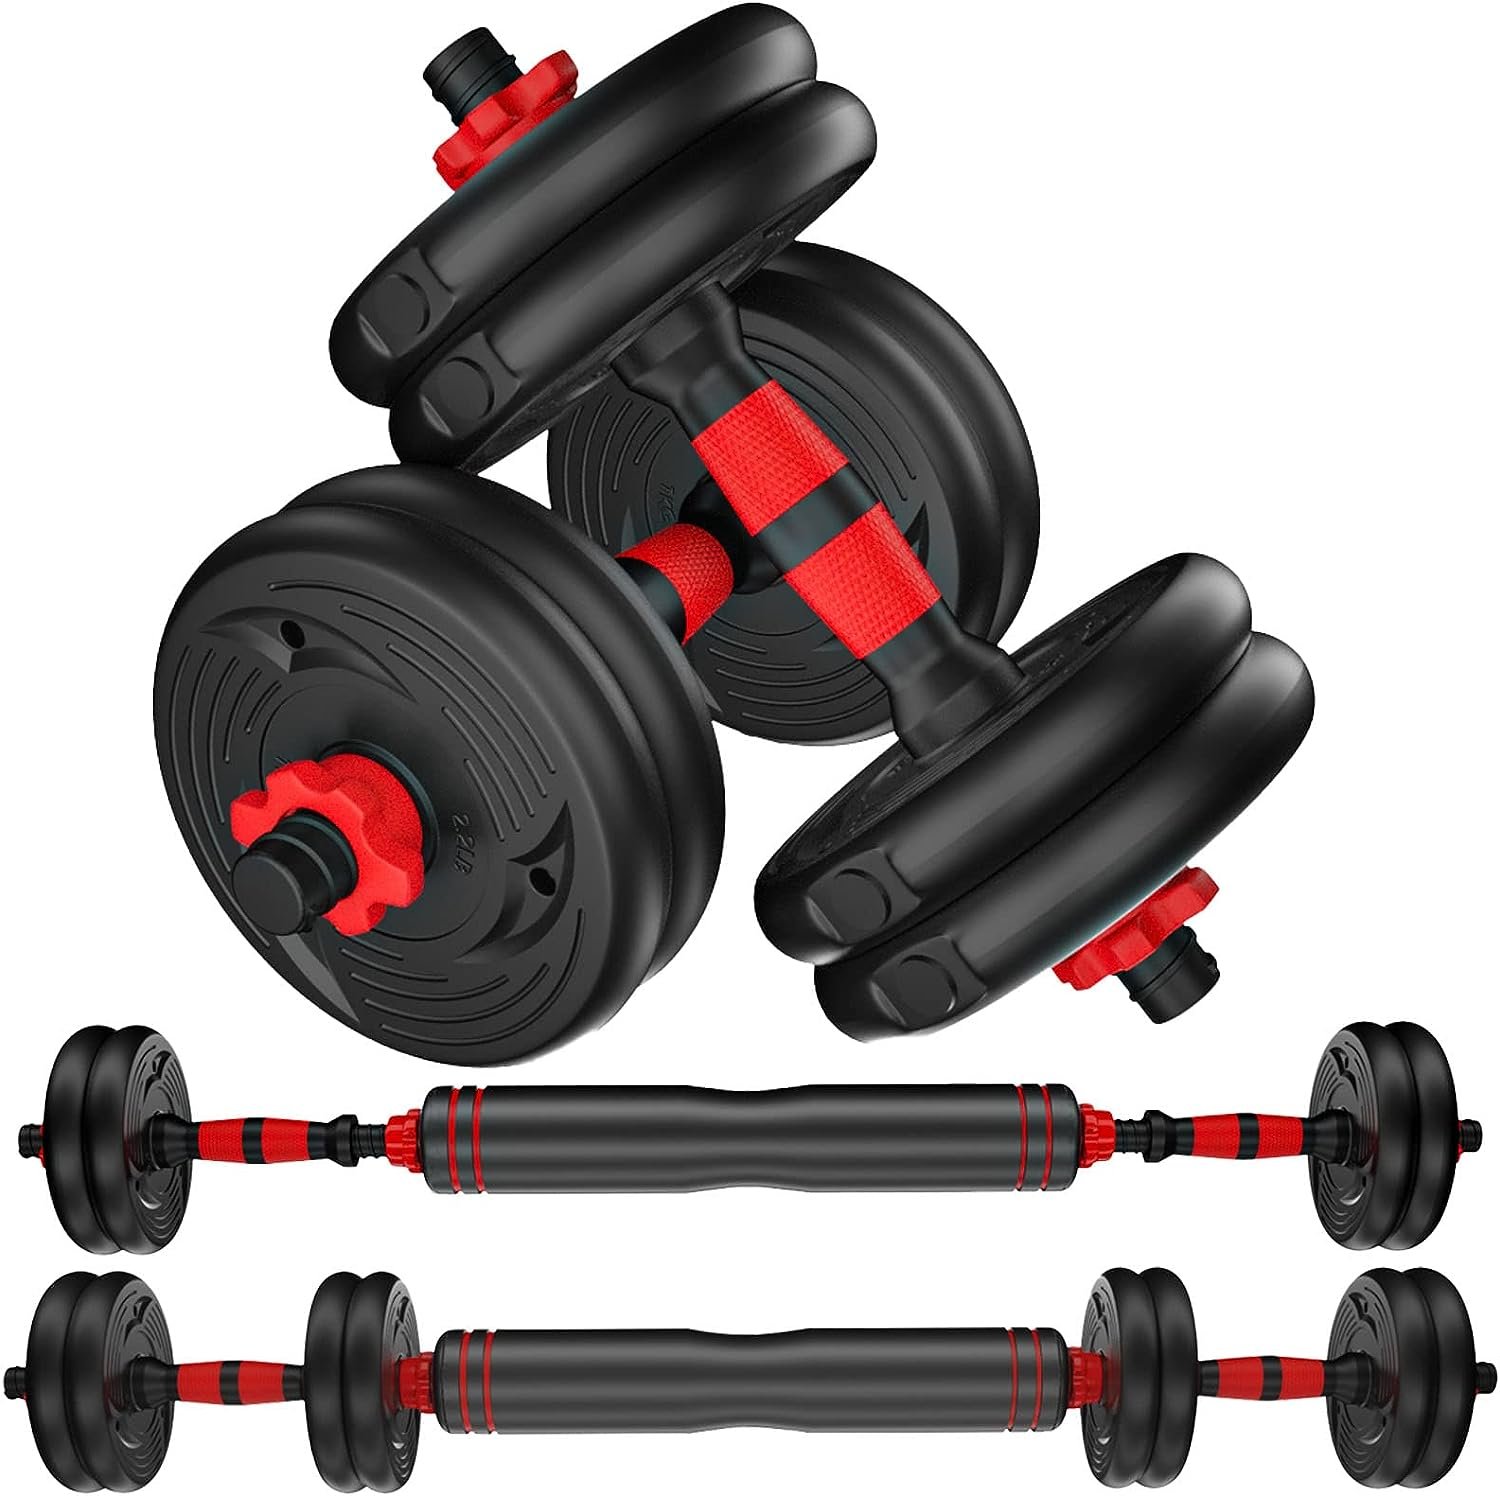 CANMALCHI Adjustable Dumbbells Weights Set 20lbs/33lbs/44lbs Review